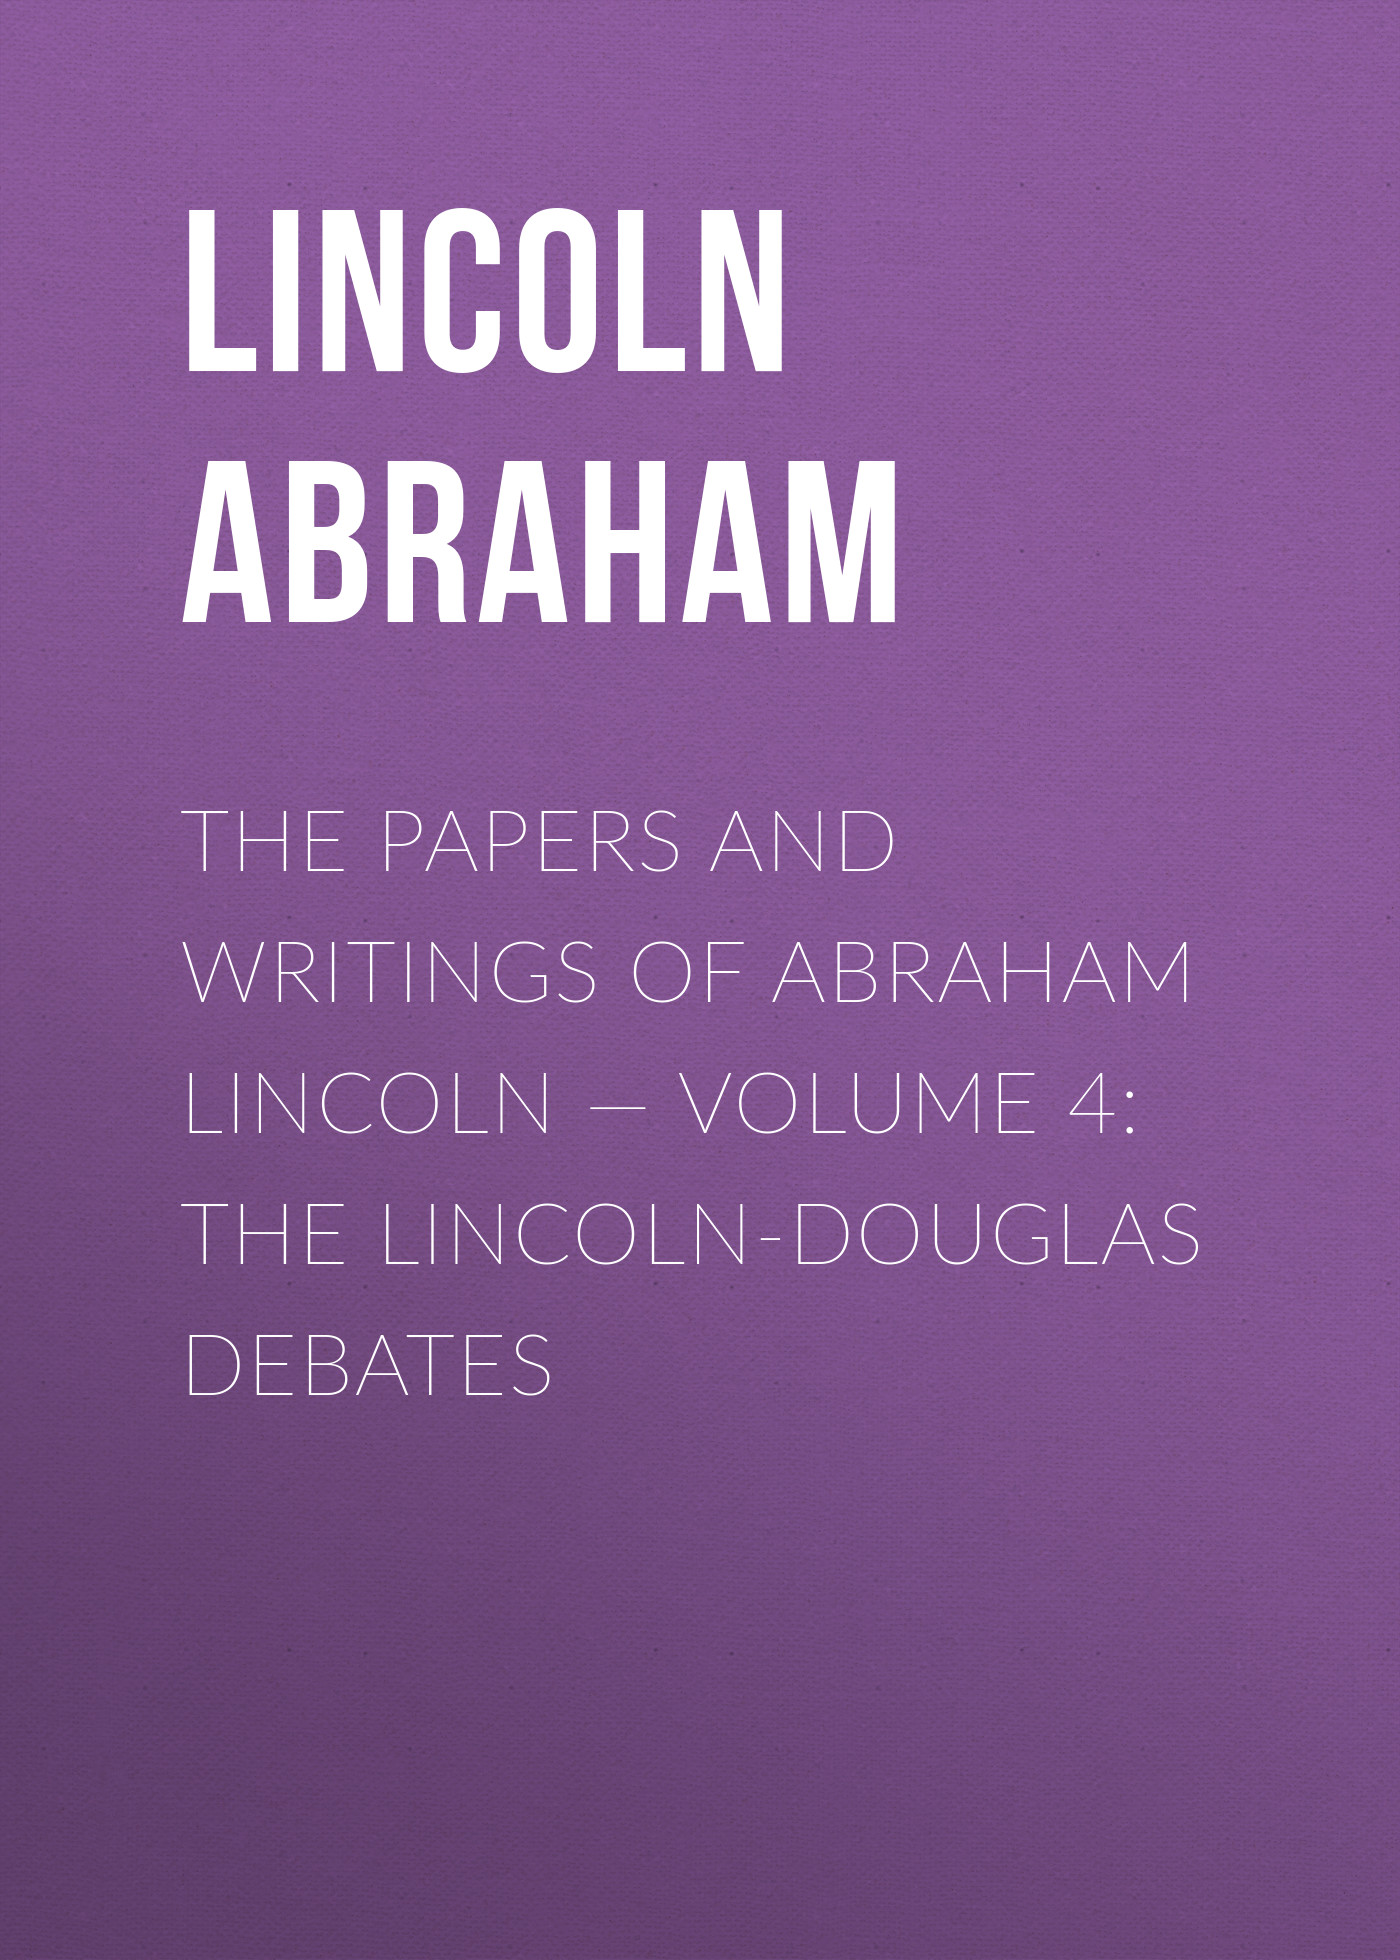 The Papers And Writings Of Abraham Lincoln— Volume 4: The Lincoln-Douglas Debates